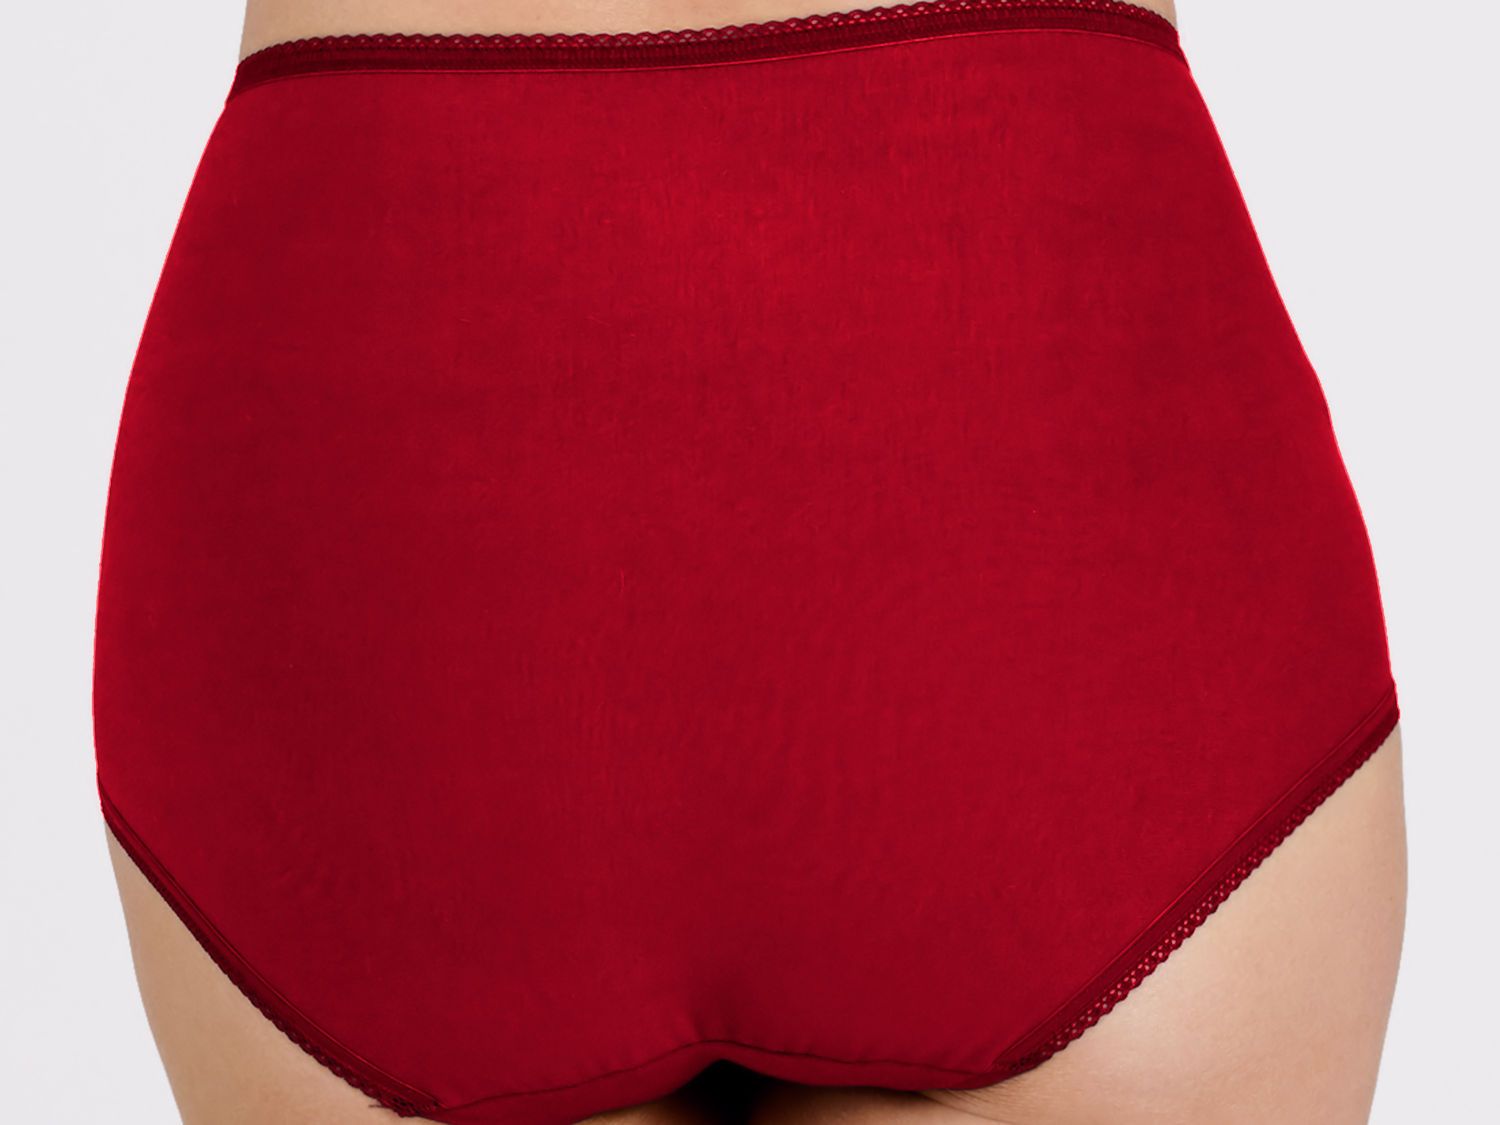 Miss Mary Lovely Lace Support Brief Red